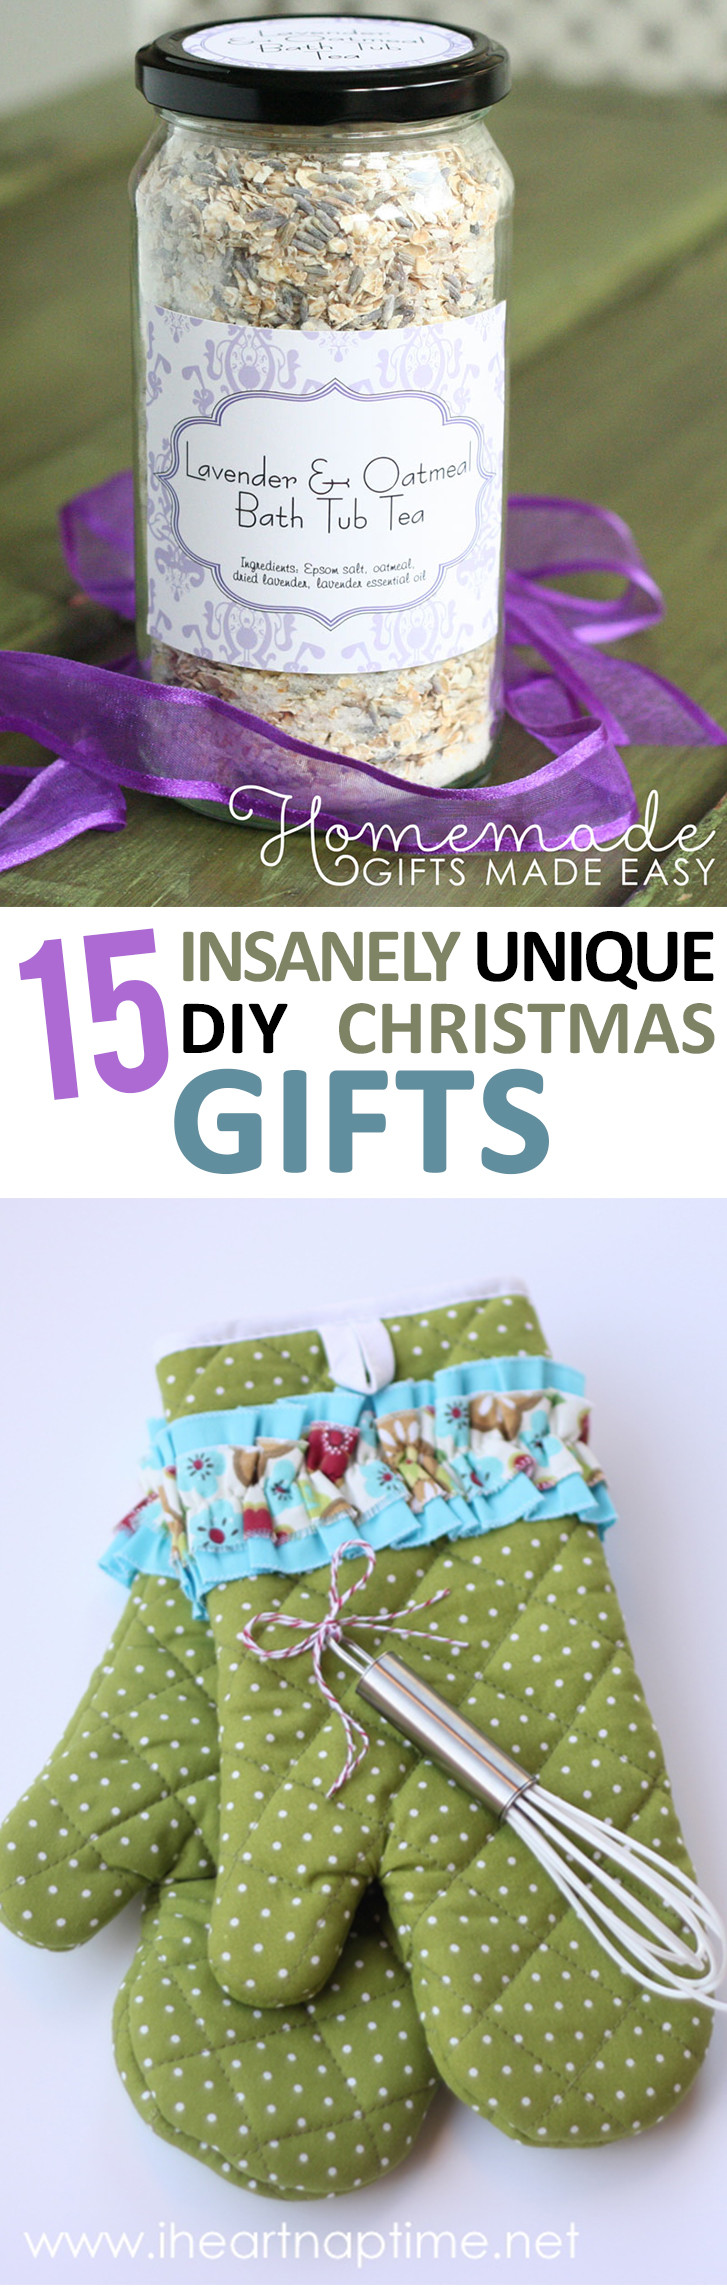 Unique Holiday Gift Ideas
 15 Insanely Unique DIY Christmas Gifts – Sunlit Spaces